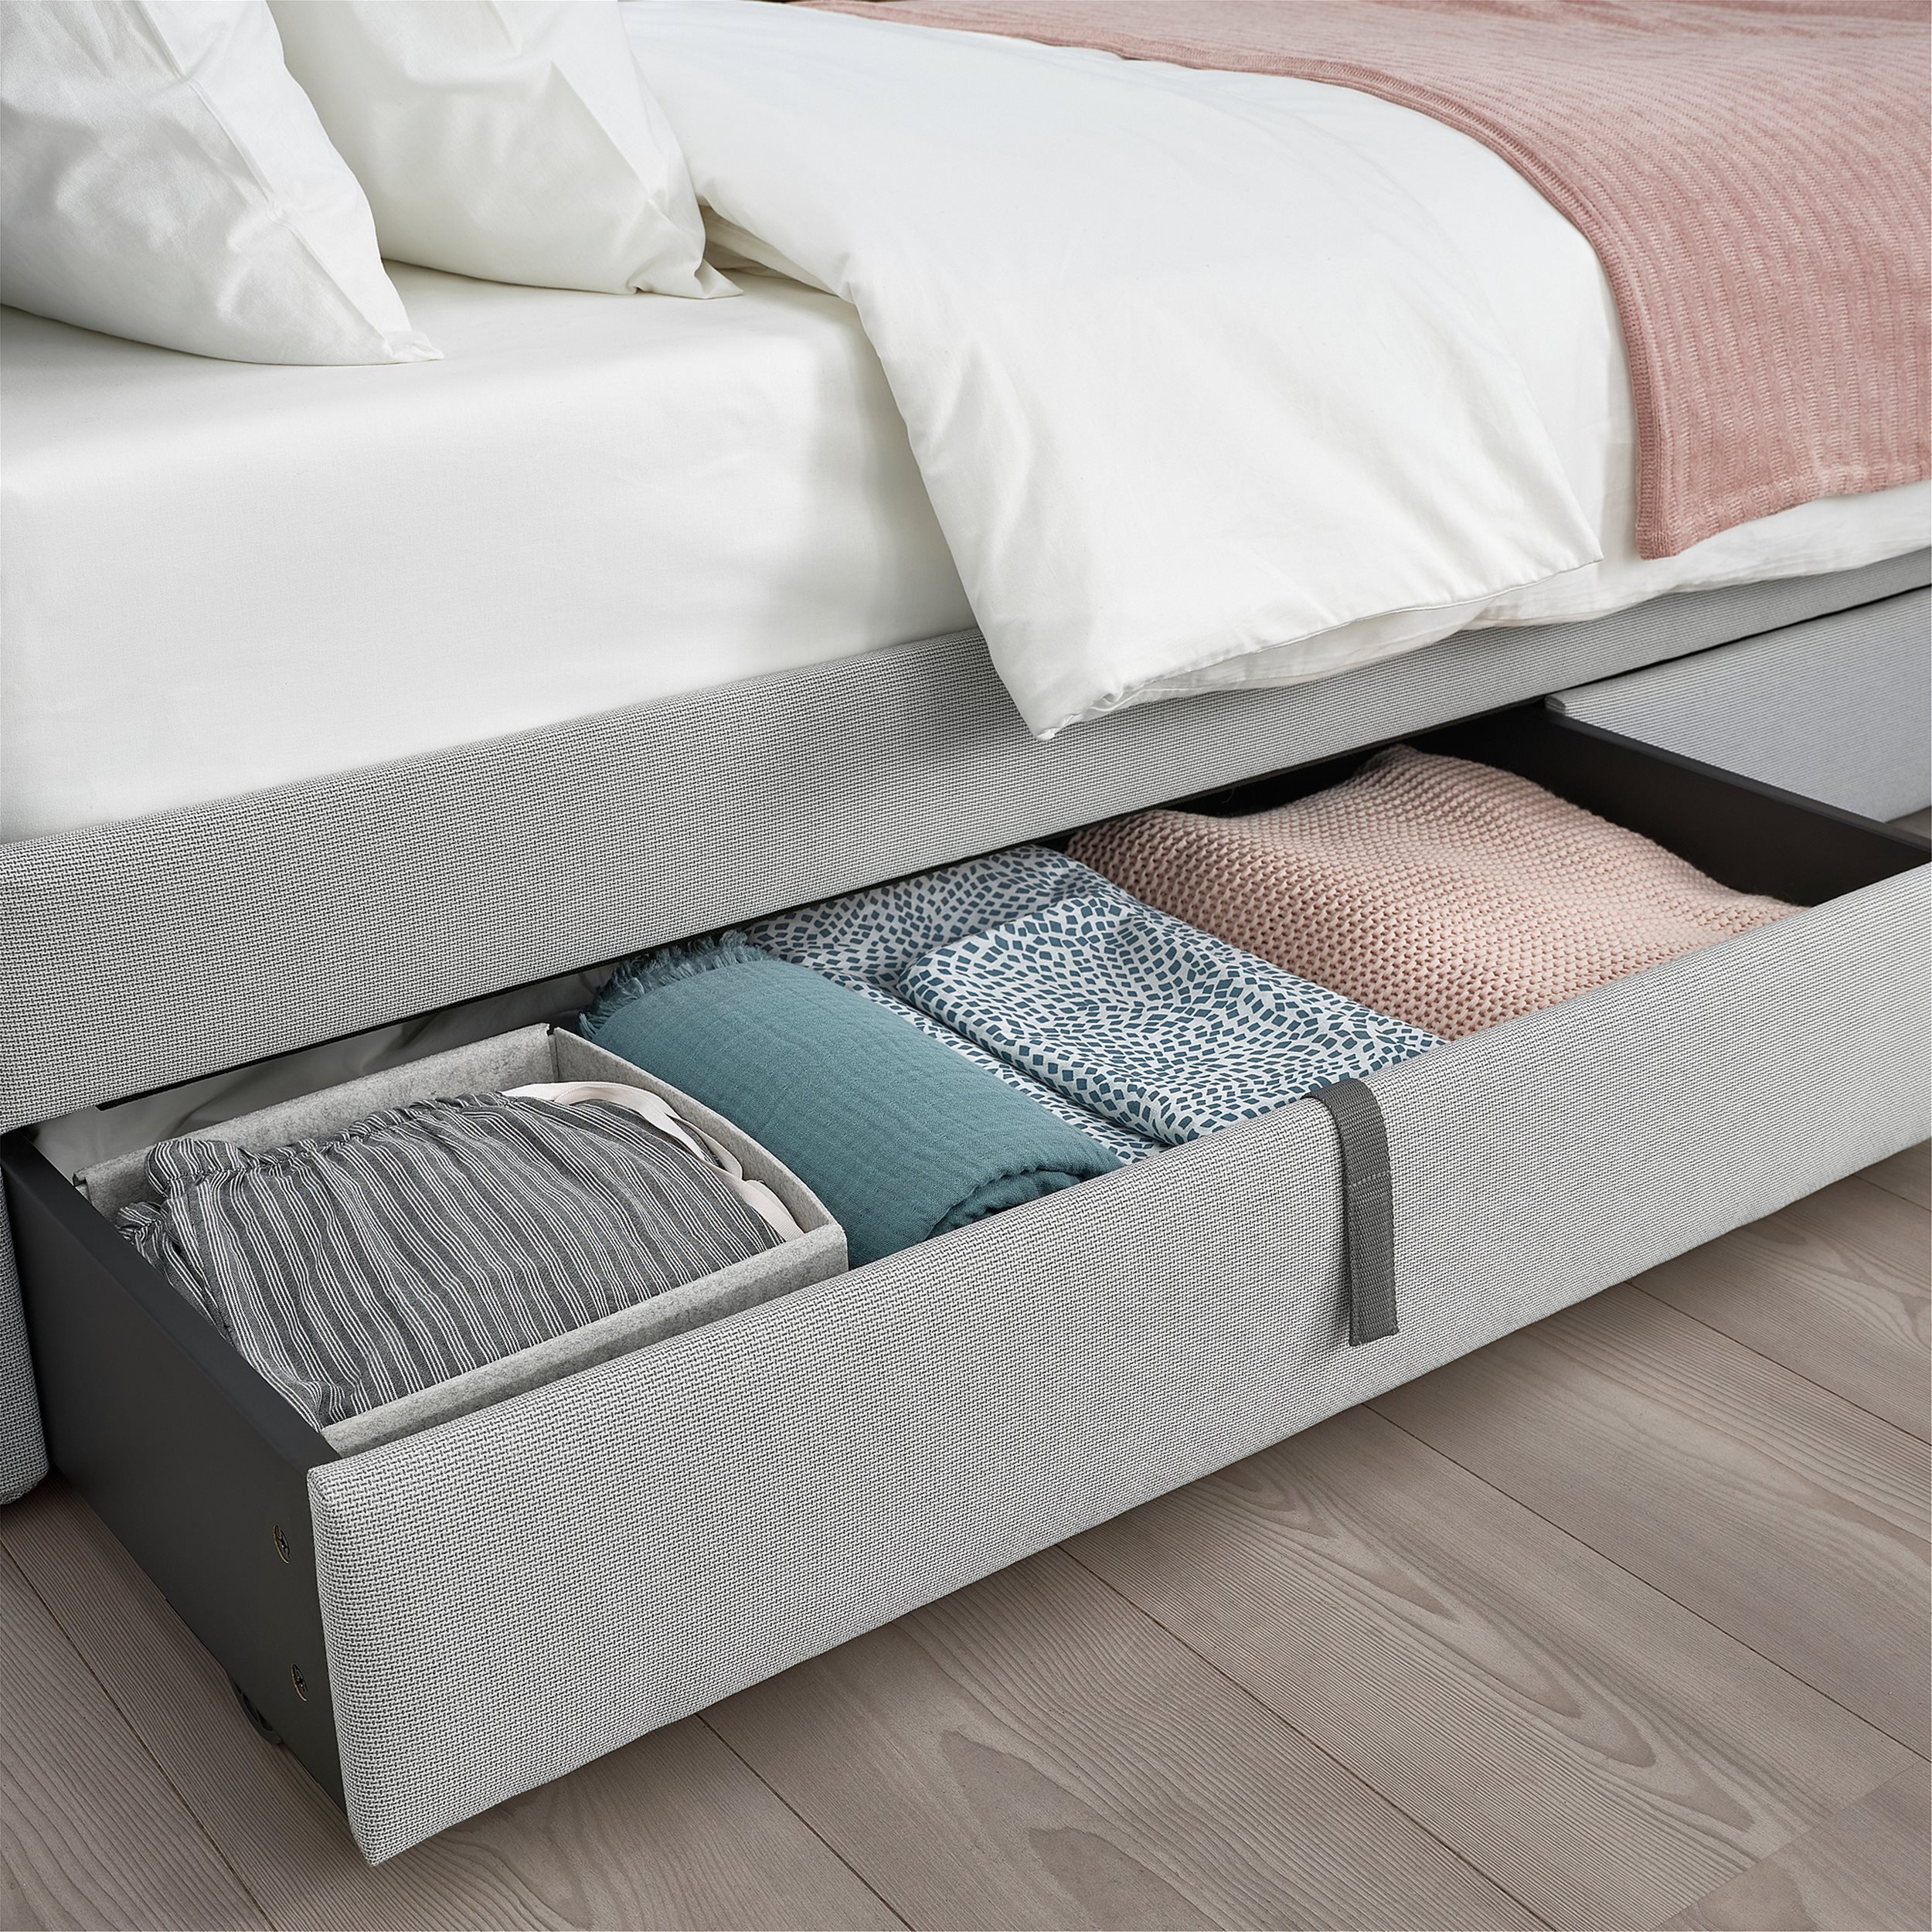 GLADSTAD upholstered bed with 4 storage boxes, 160x200 cm